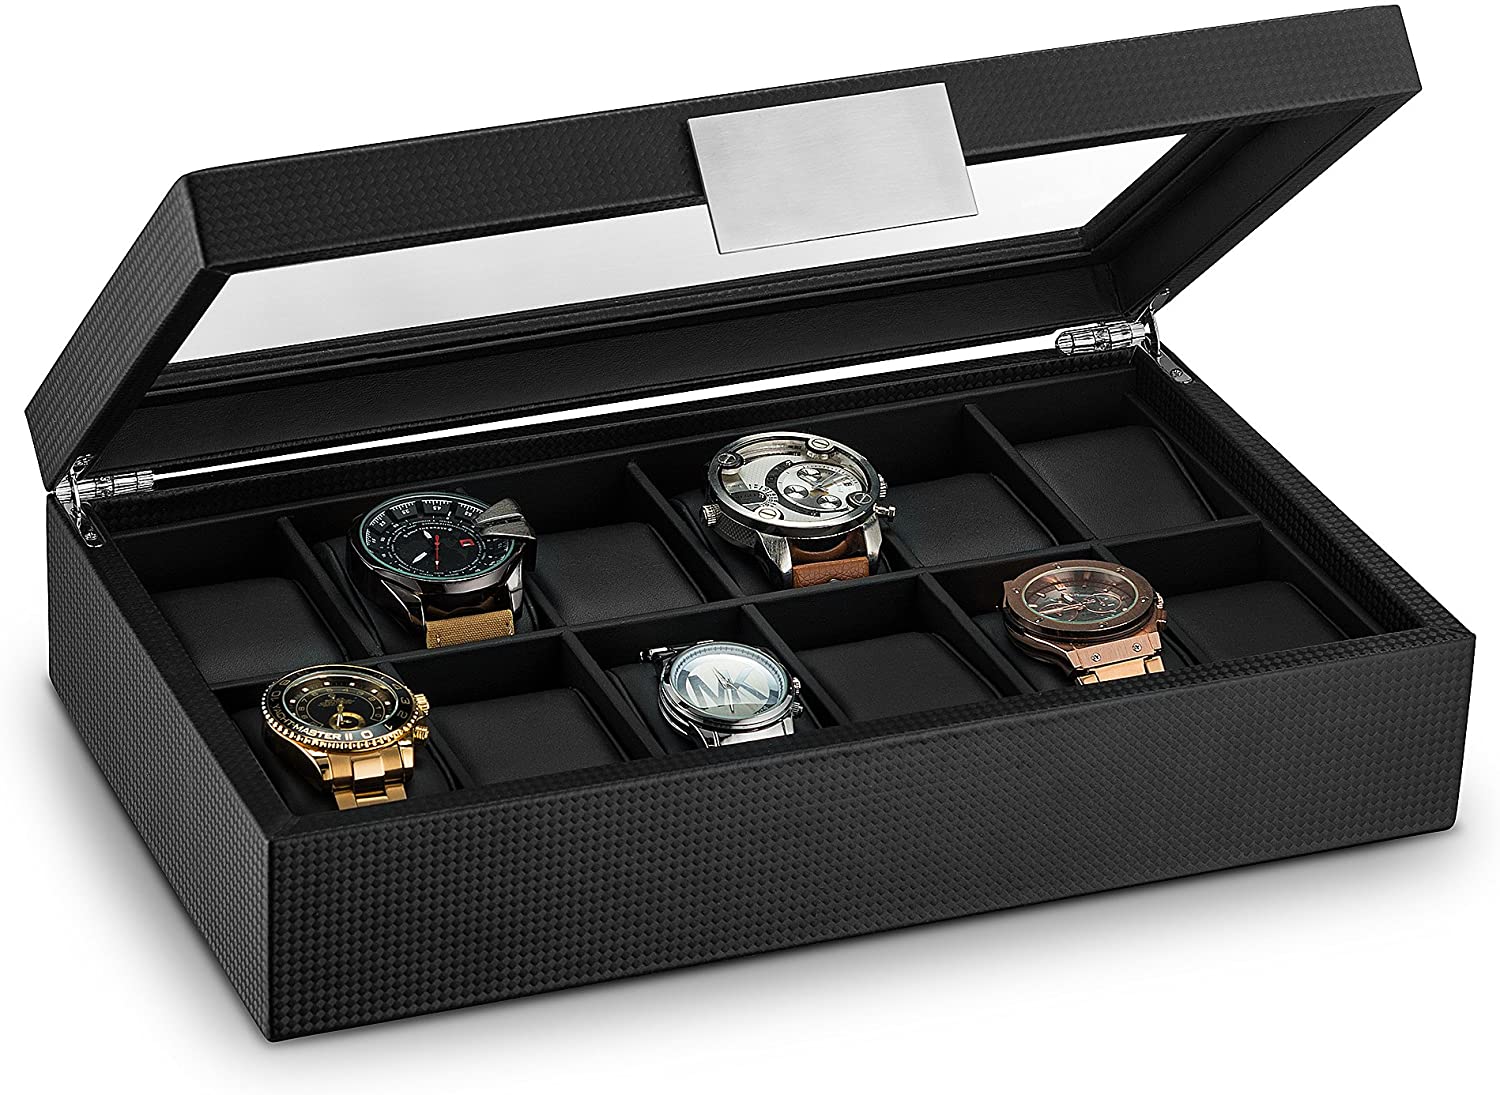 My New Toy - Watch Box Winder - Short Video Oof The Cuff - Luxury Watches -  YouTube